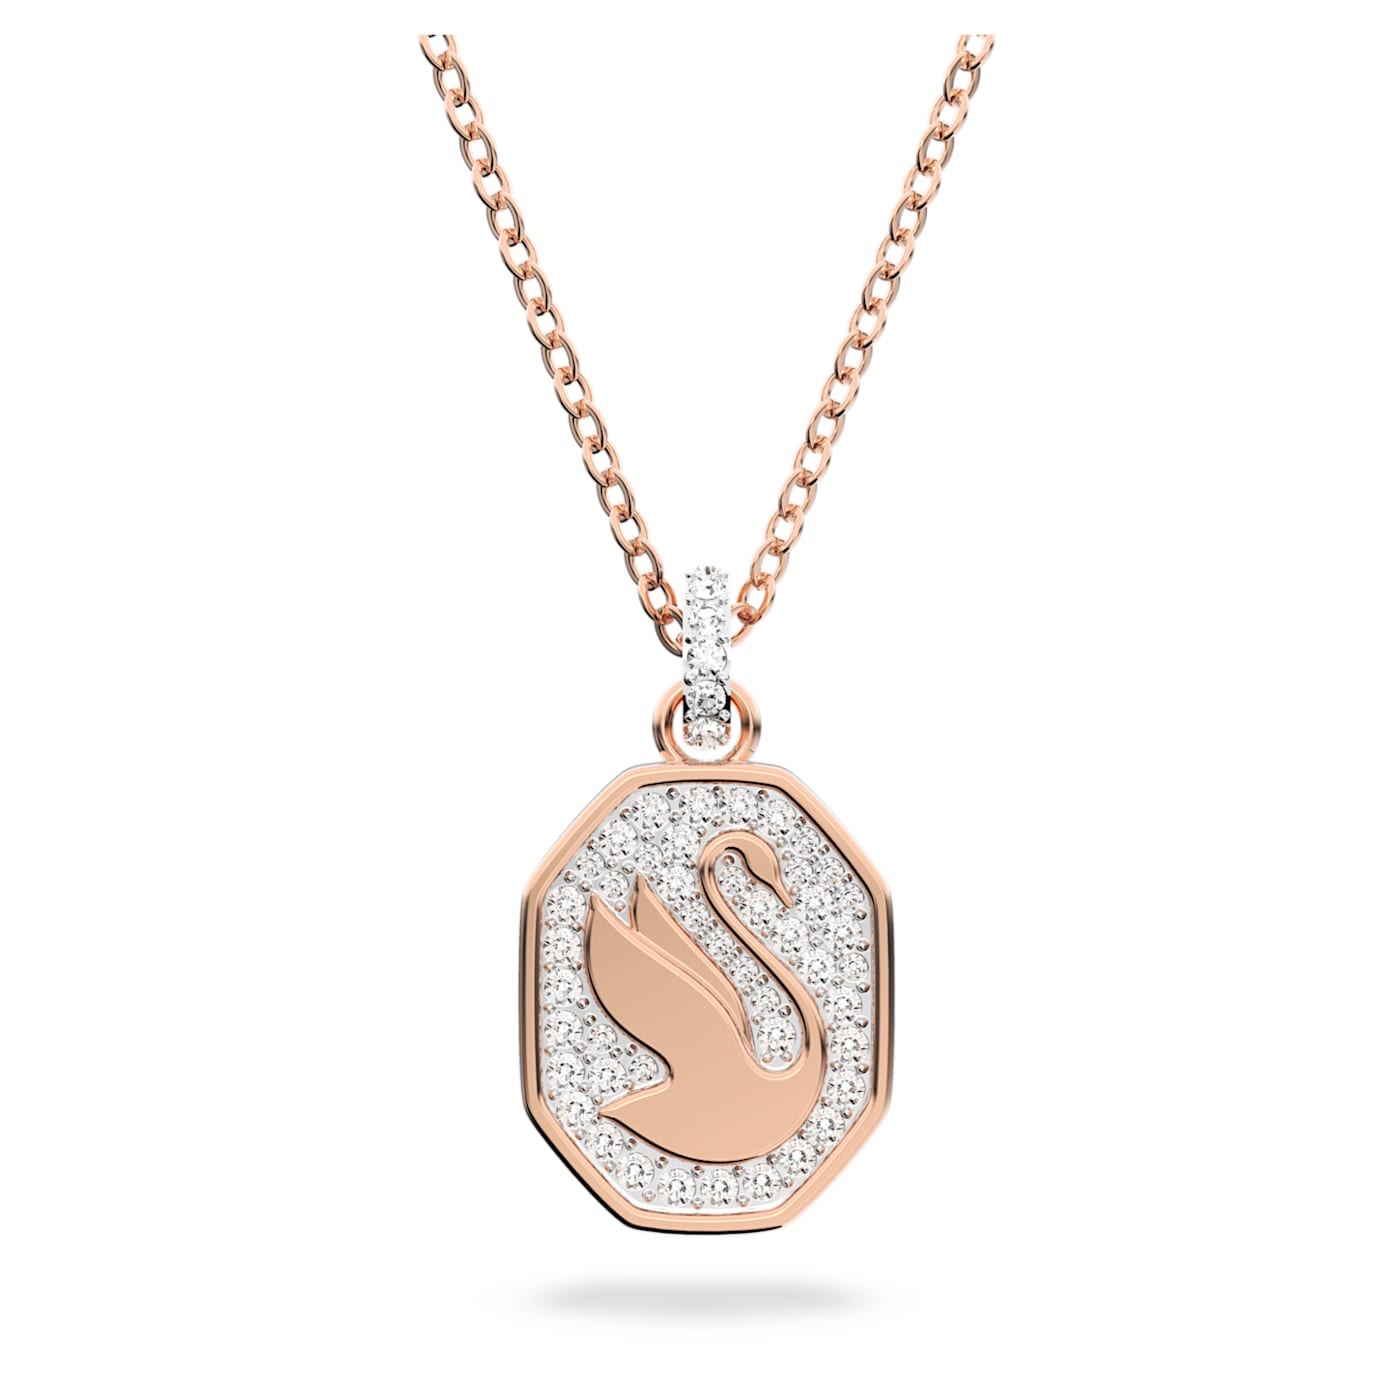 SIGNUM SWAN PENDANT, WHITE, ROSE-GOLD TONE PLATED